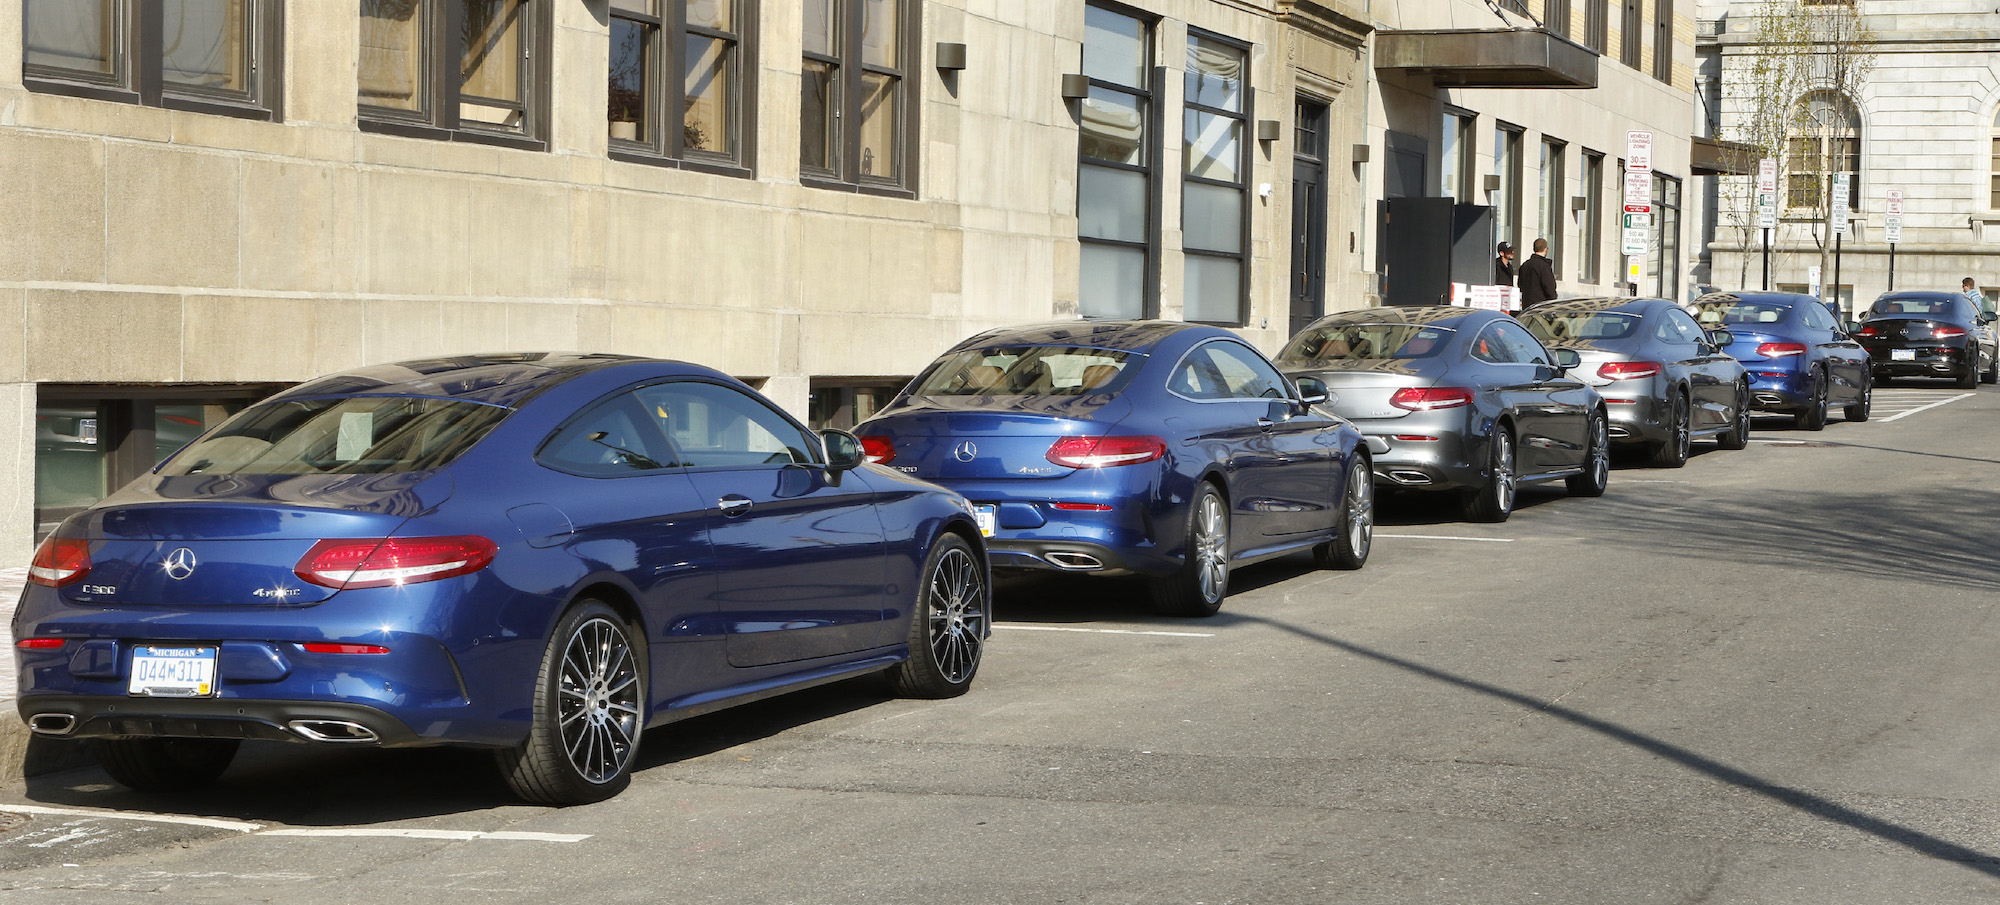 2016 Mercedes-Benz C300 coupes line Market Street outside the Press Hotel on Thursday, May 12, 2016